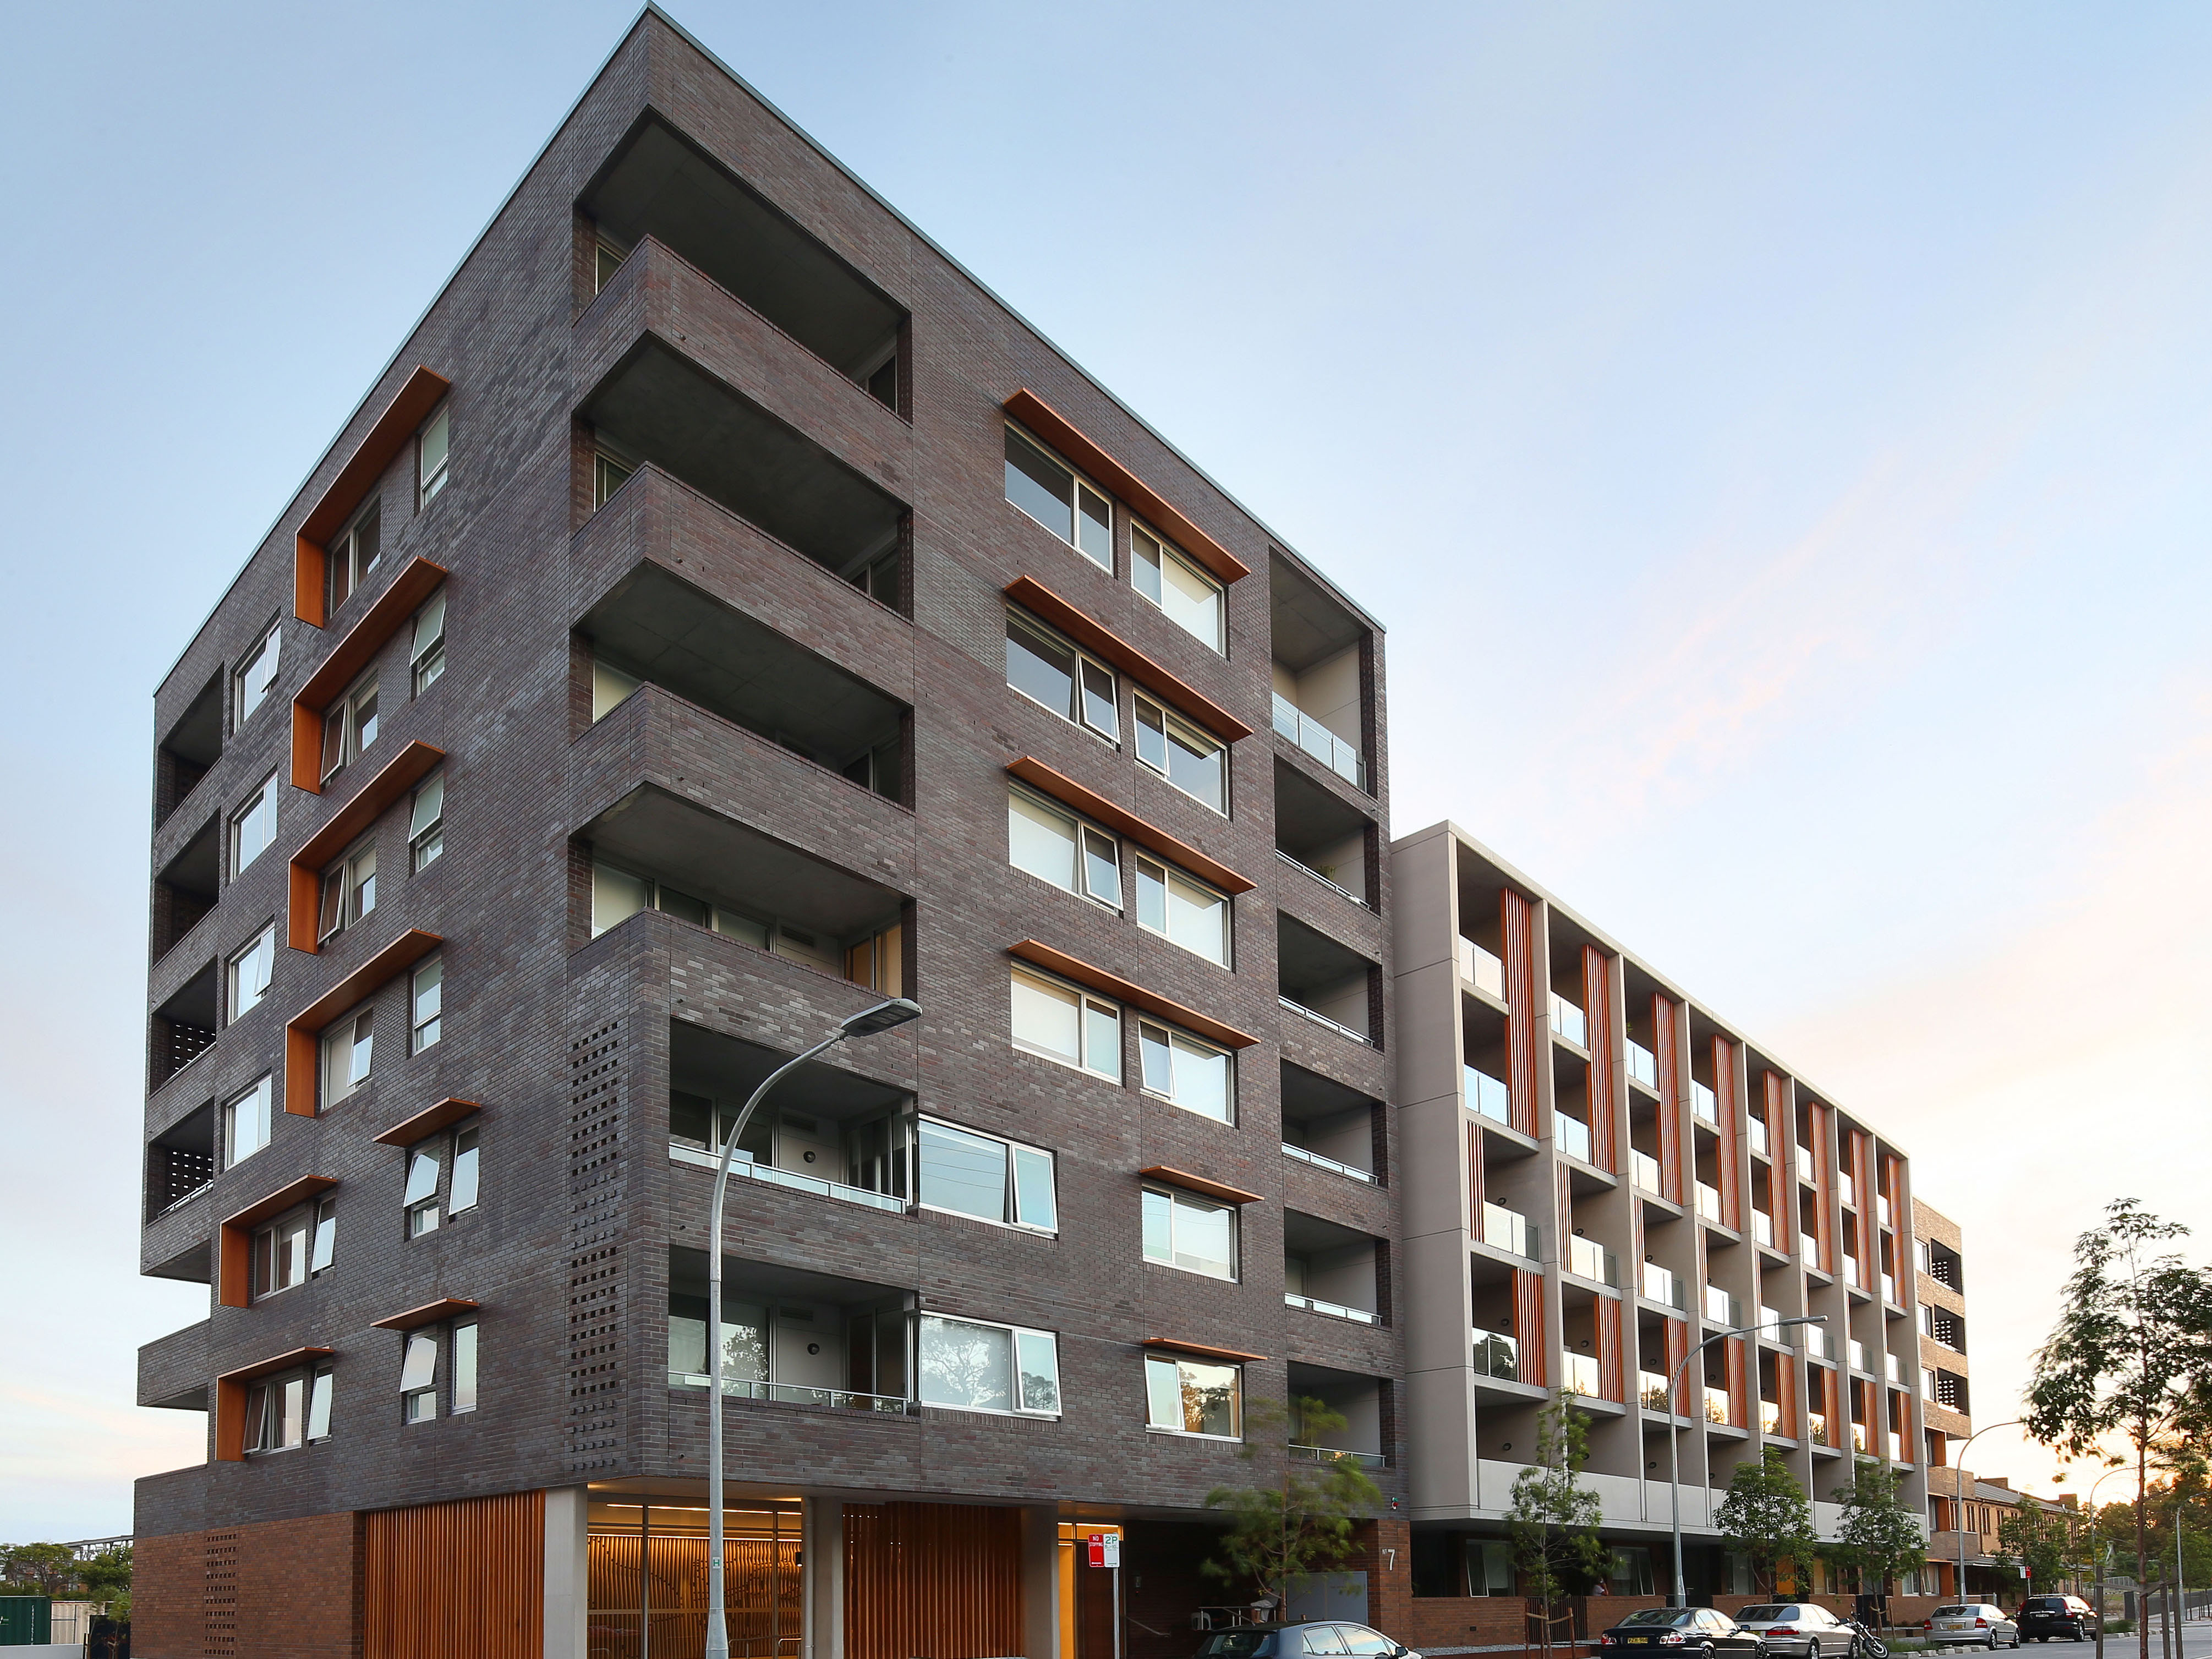 The Platform Apartments at Eveleigh are an example of affordable housing in the City of Sydney. Image: CMAA Australia
